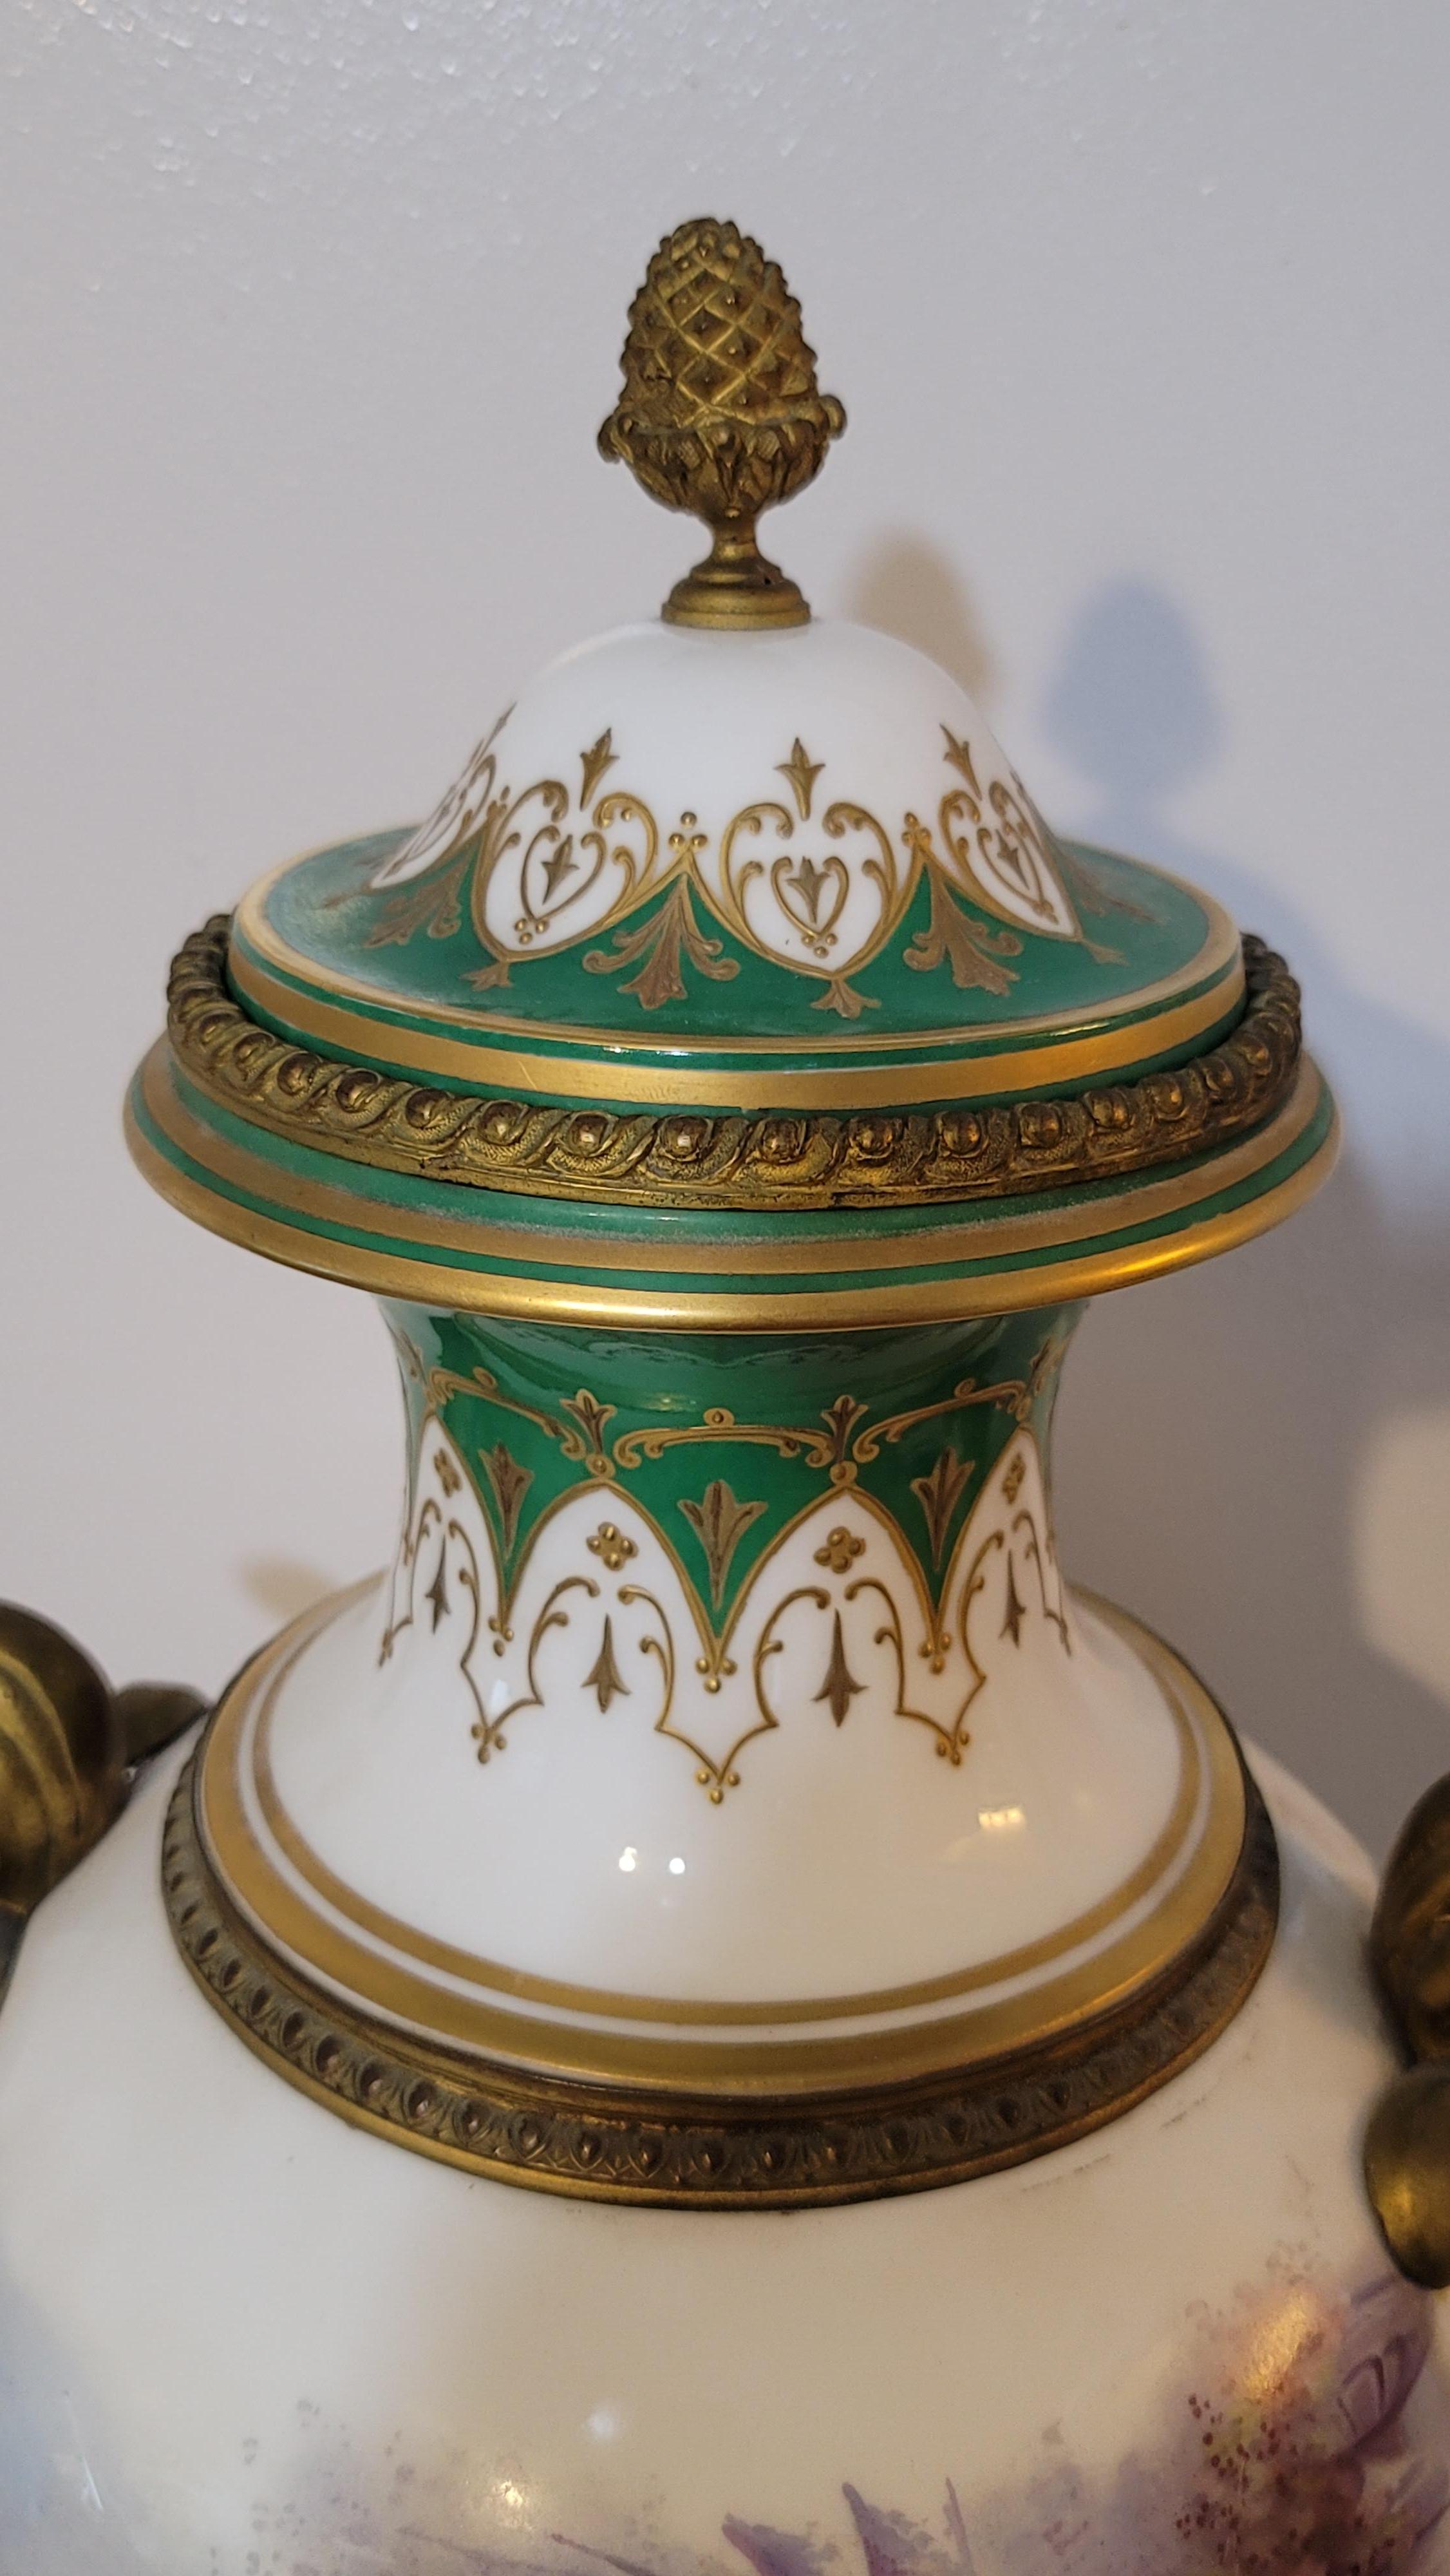 A large 19th century antique Sevres Porcelain Urn featuring in white and green ground color, decorated with scenes of courting couples and floral bouquet motifs, further fitted with ornate gilt bronze applications. Artist Signature on the Painting